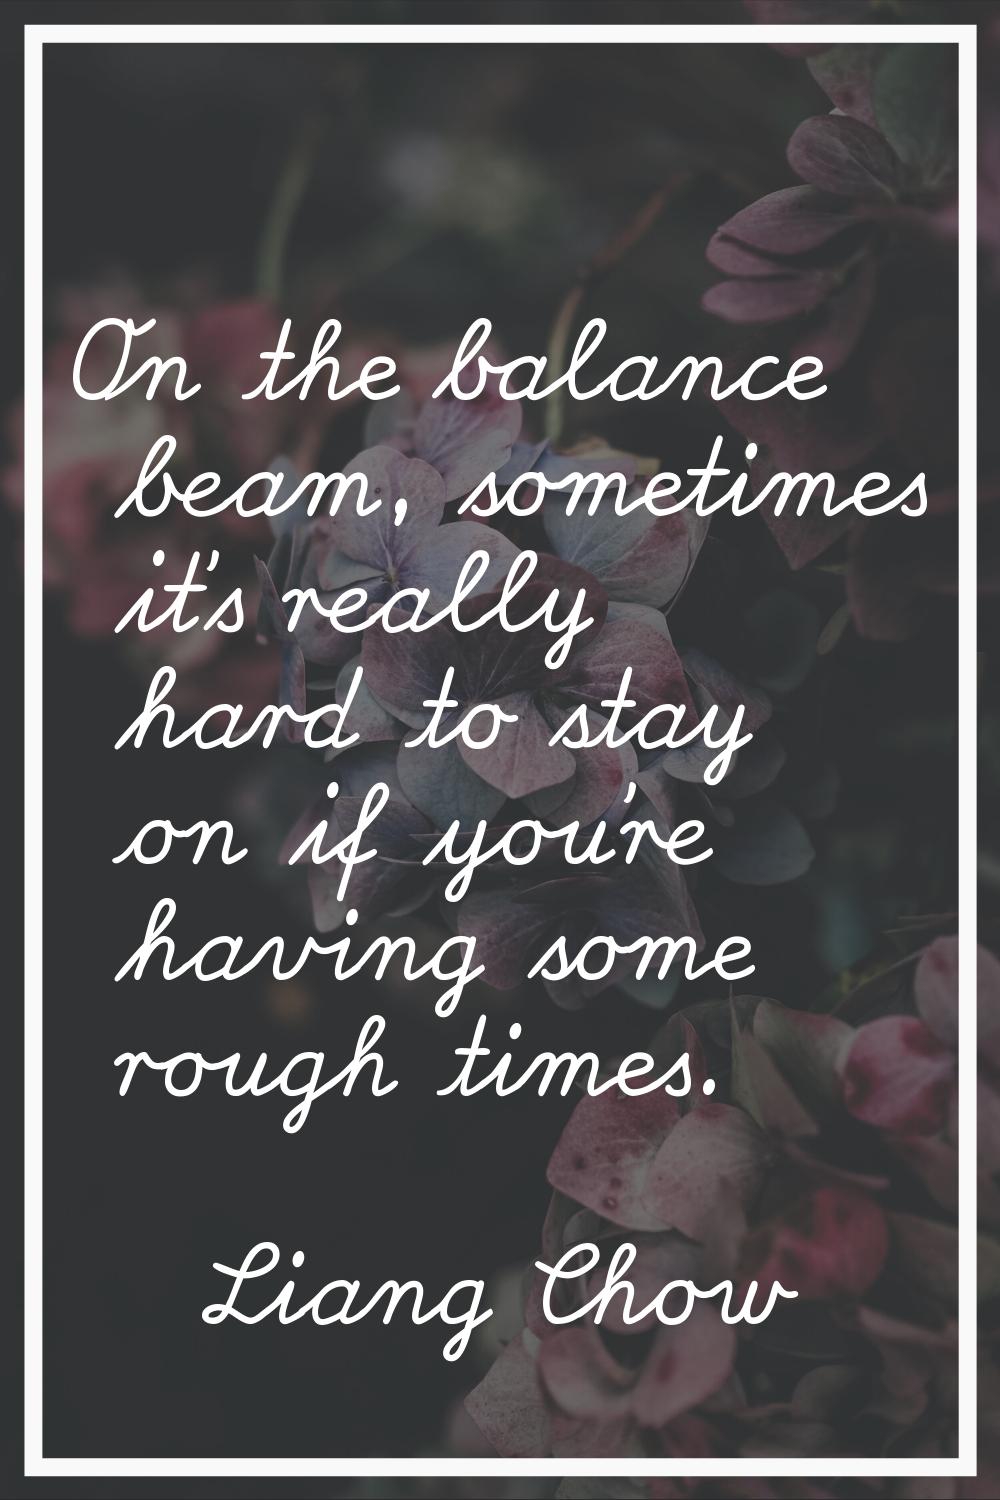 On the balance beam, sometimes it's really hard to stay on if you're having some rough times.